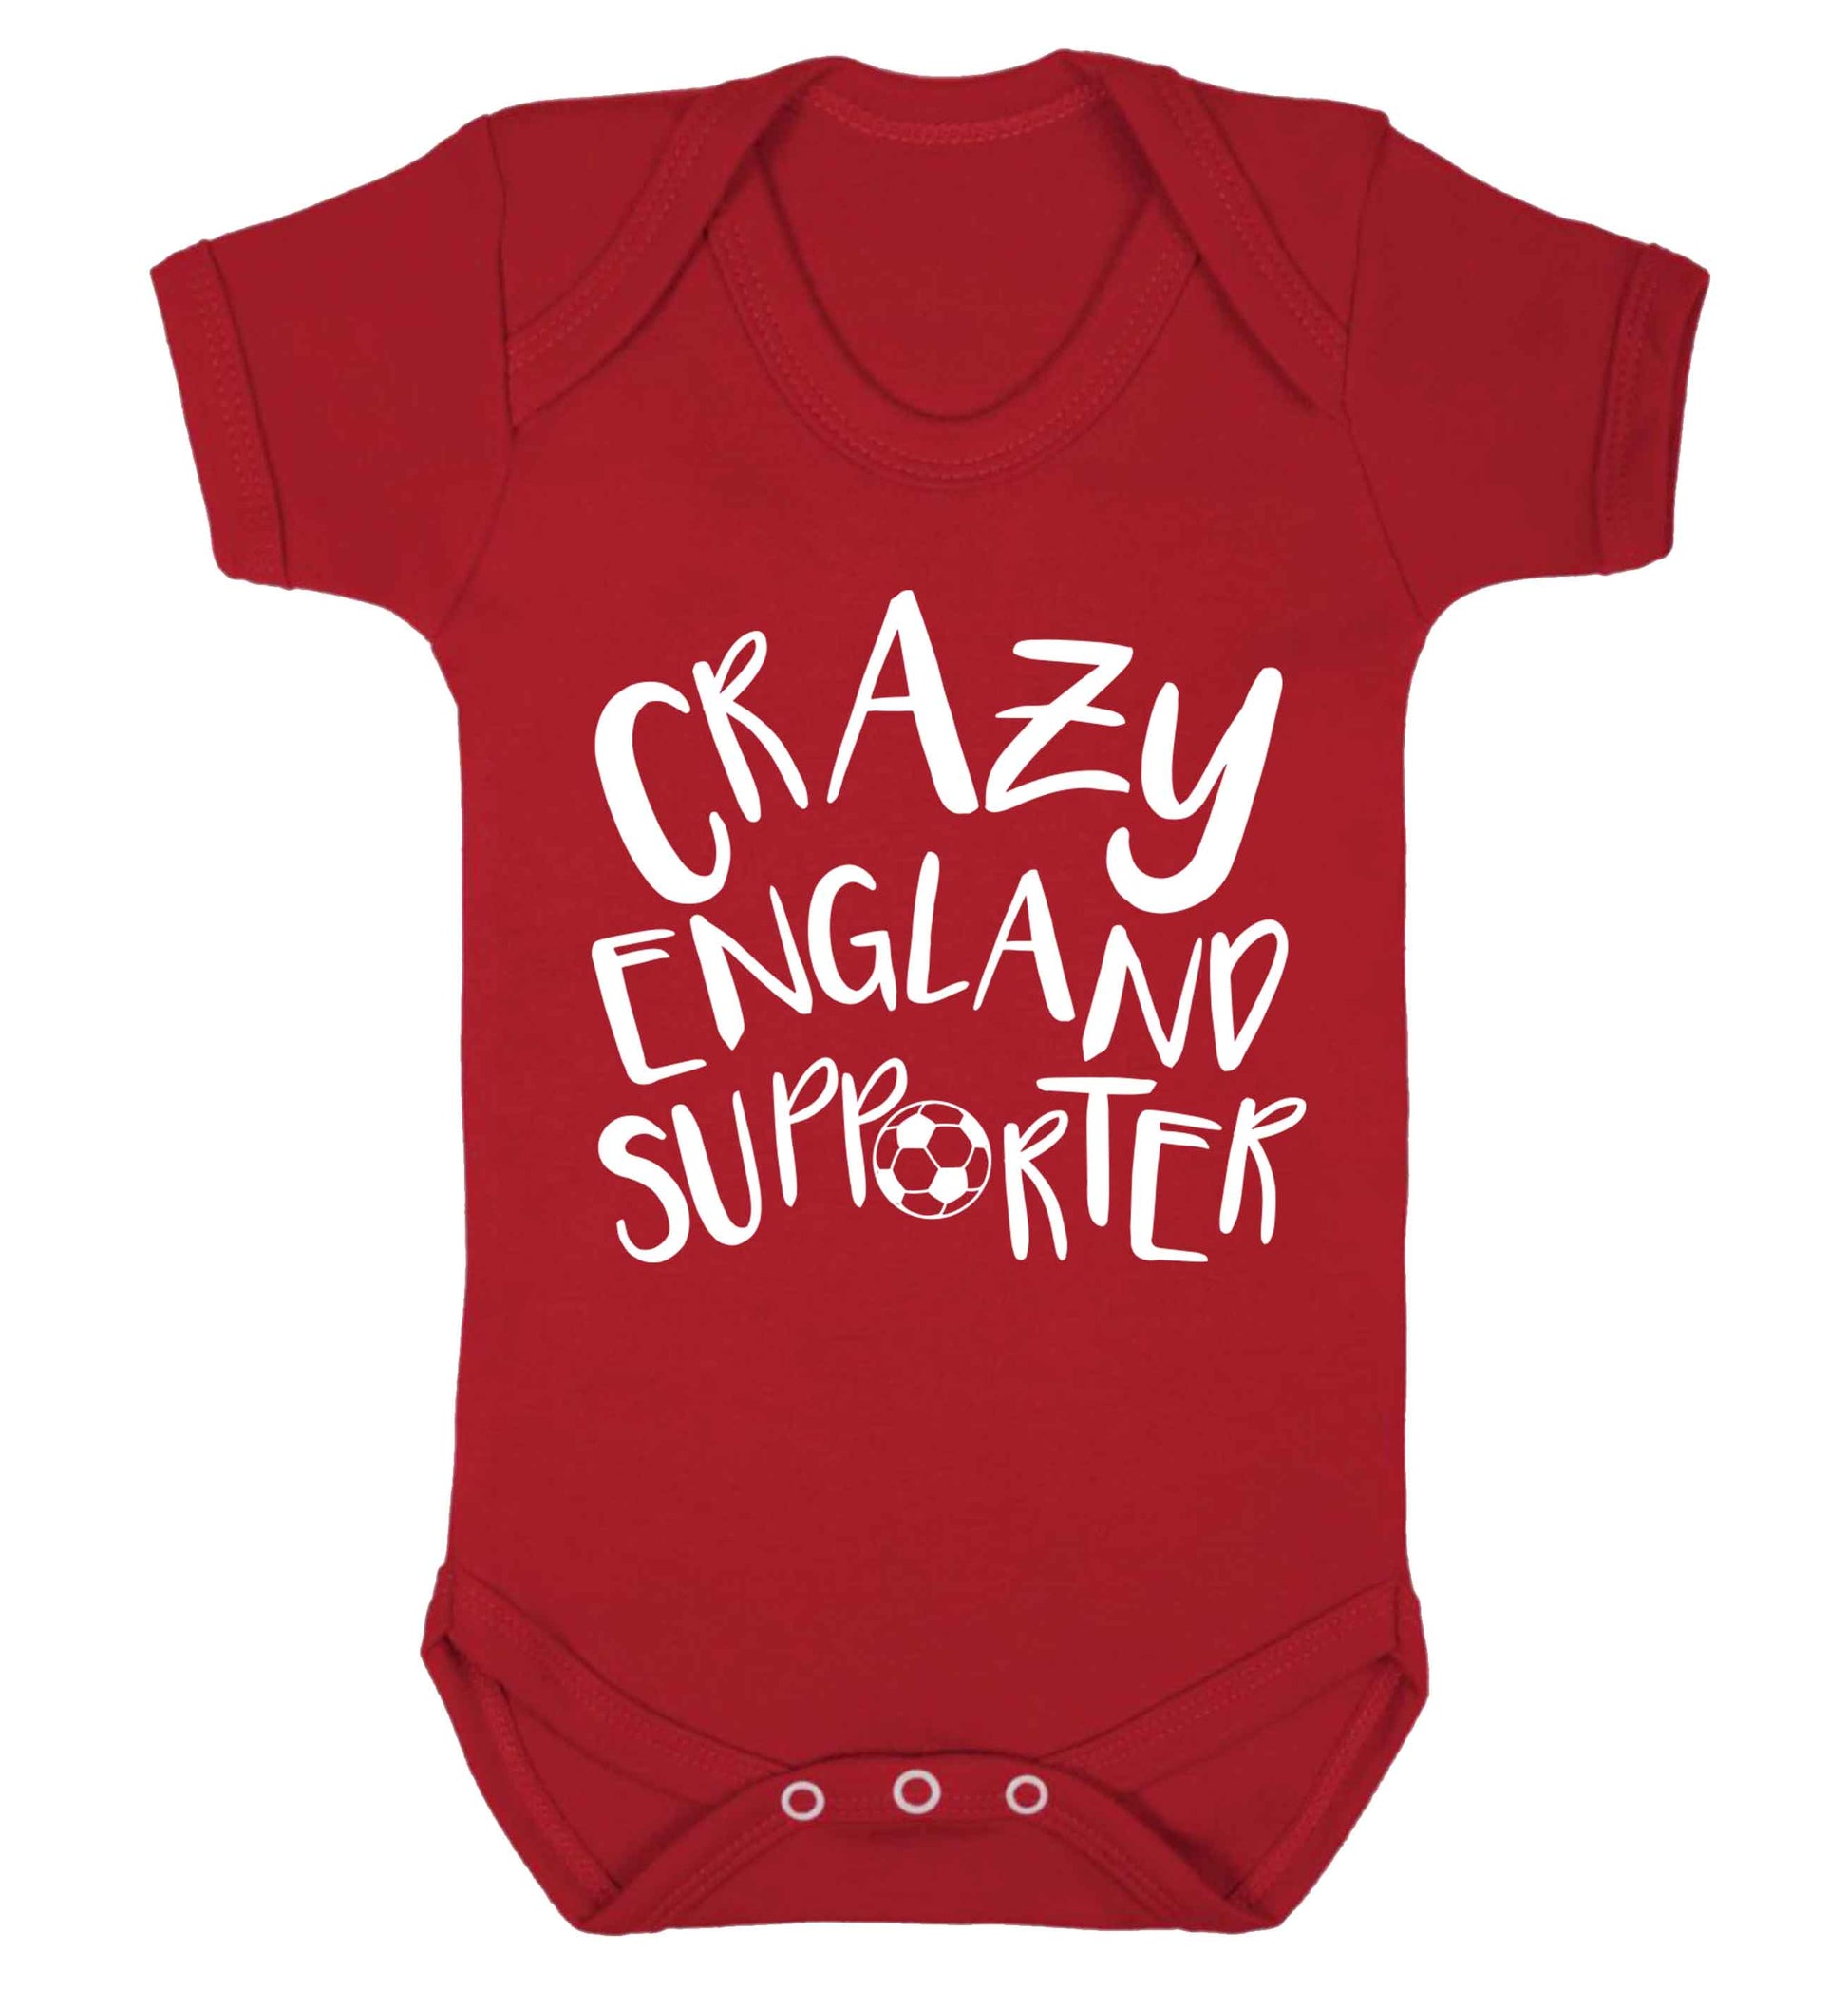 Crazy England supporter Baby Vest red 18-24 months